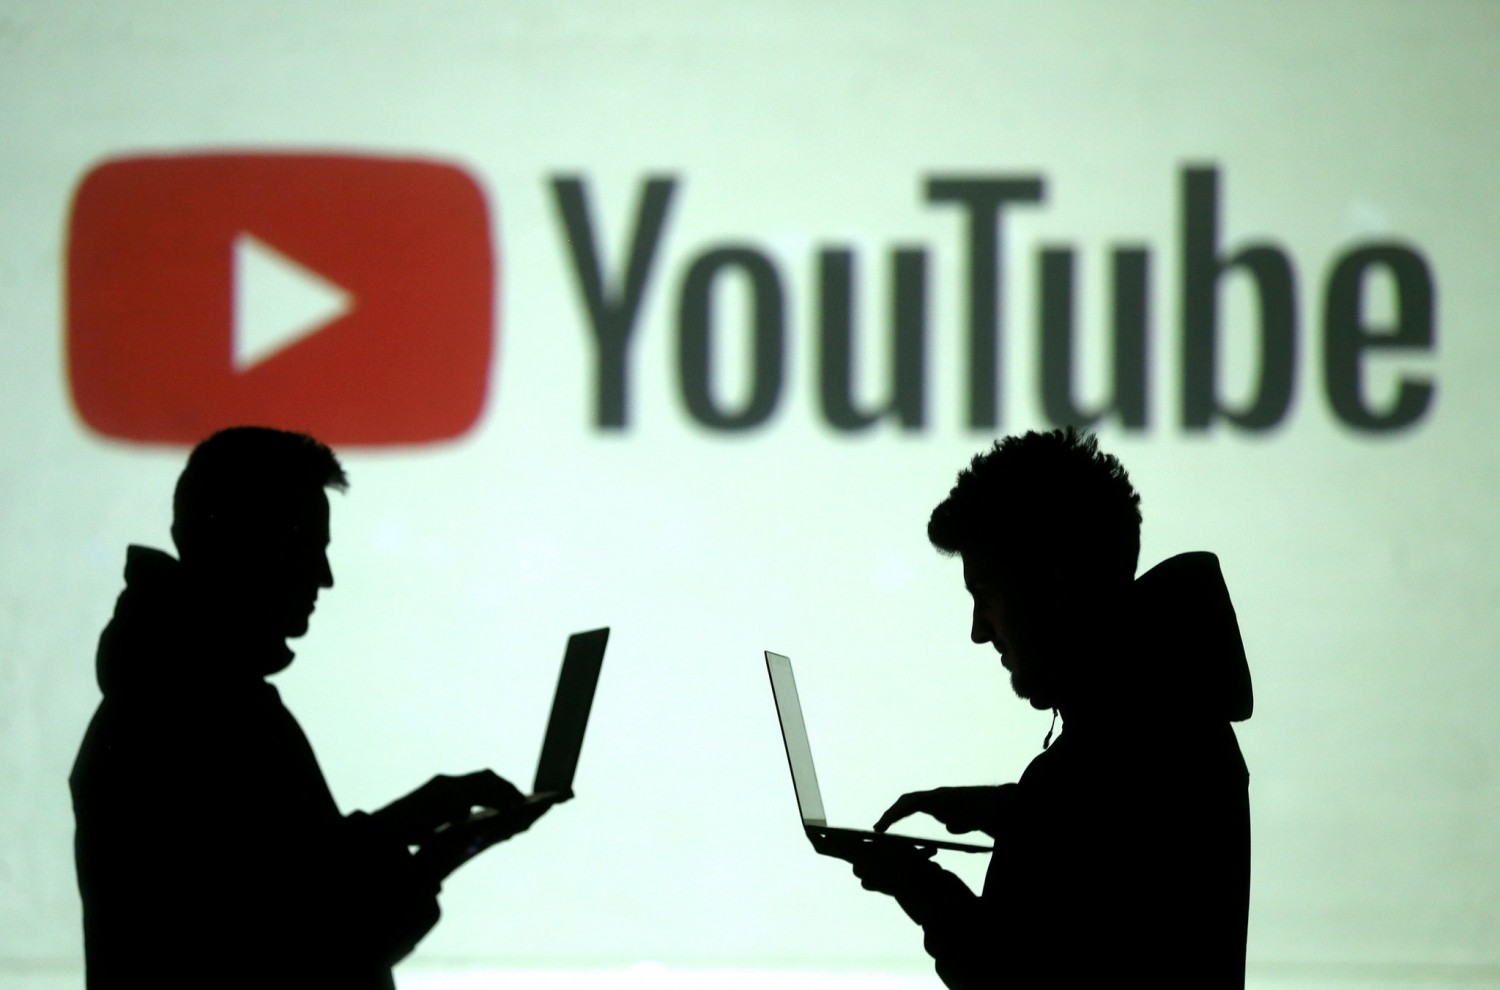 Content “alleging that a group is superior in order to justify discrimination, segregation or exclusion,” and videos denying that violent incidents occurred will be removed, YouTube said Wednesday.CreditCreditDado Ruvic/Reuters